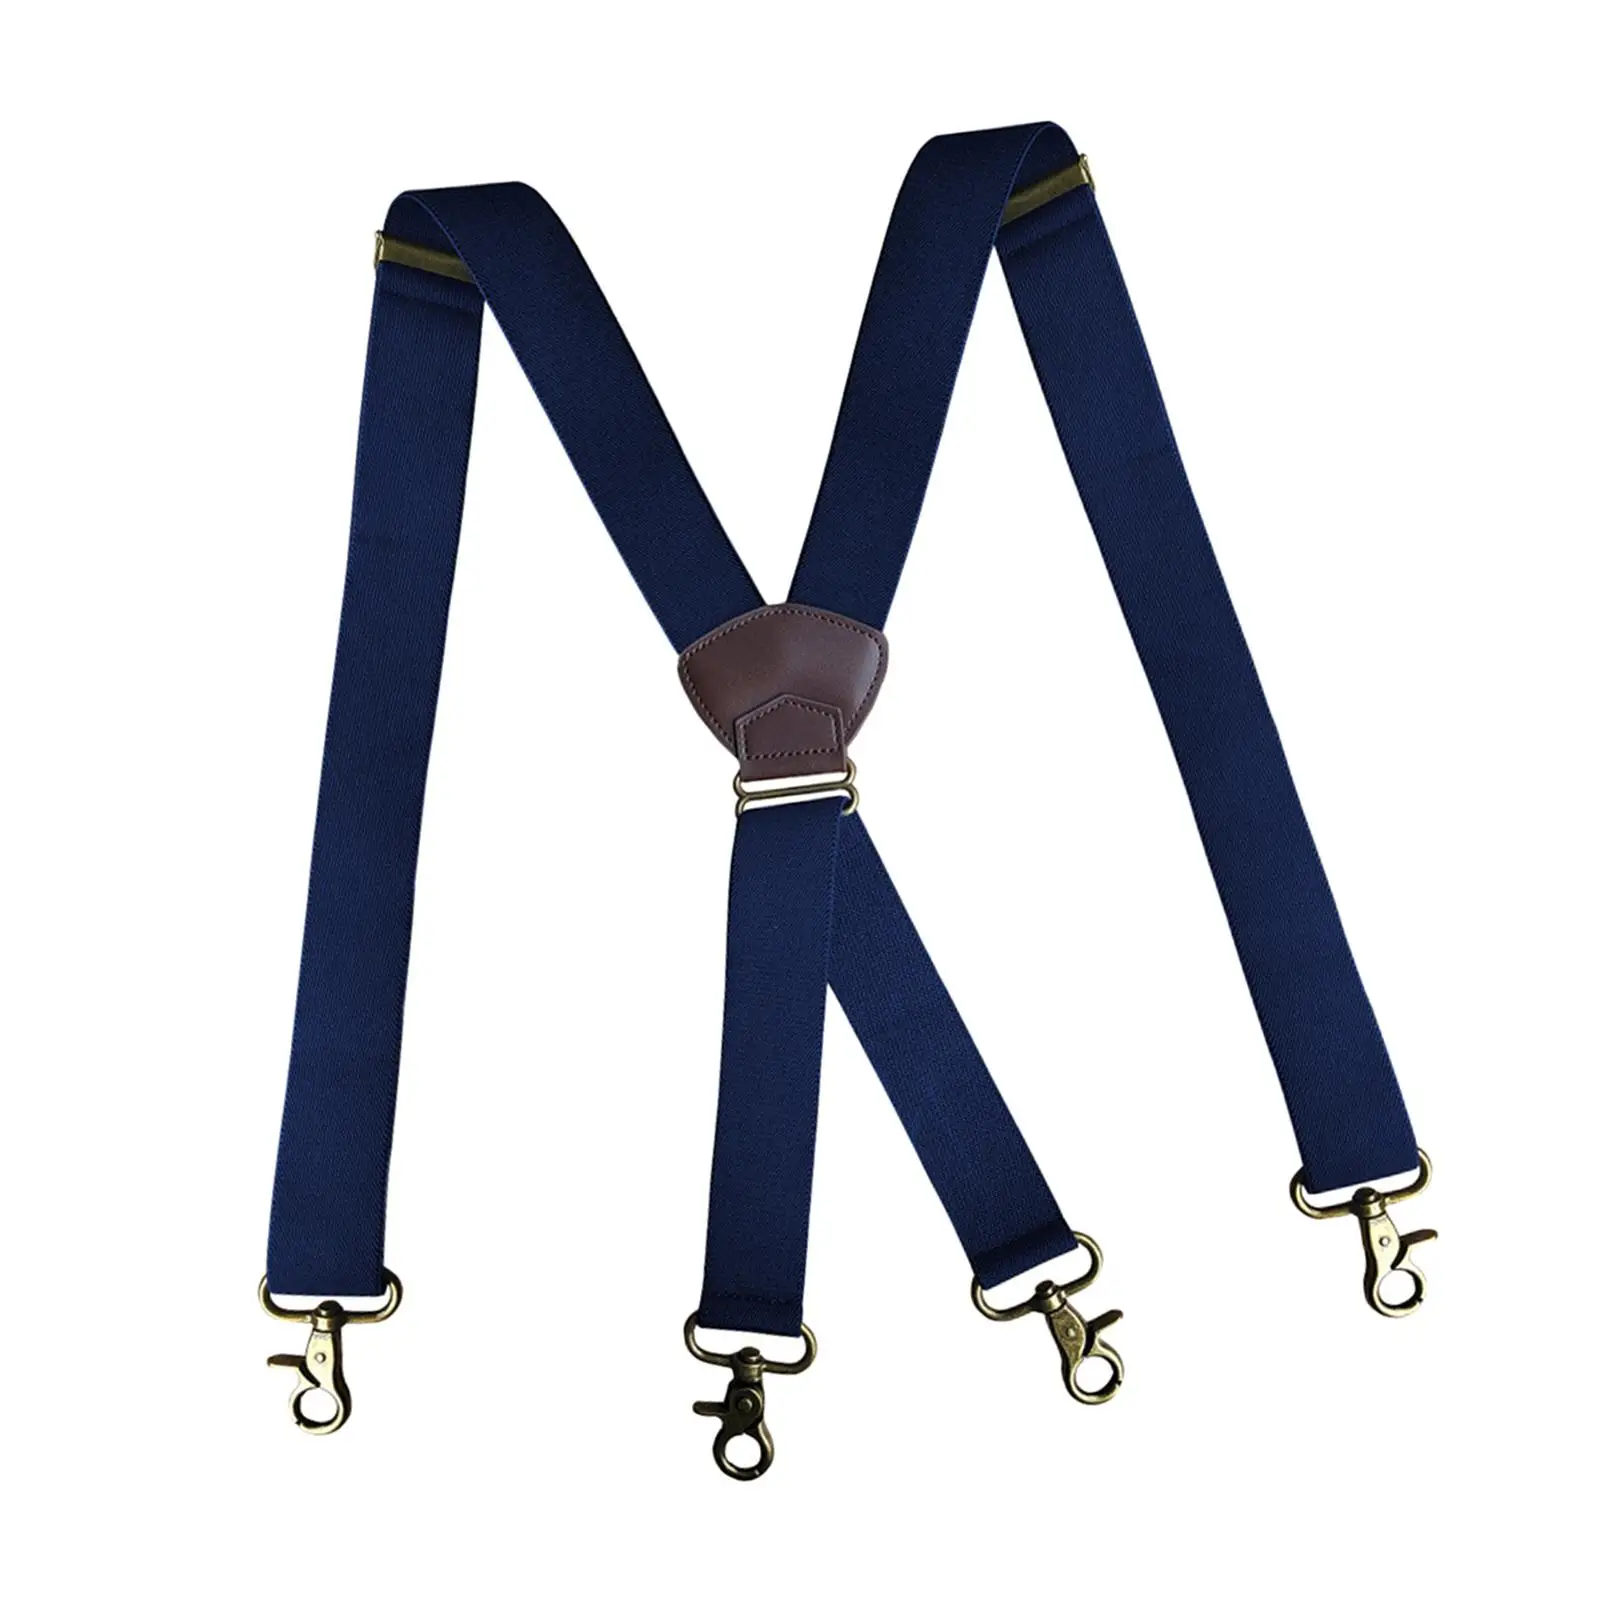 Men Suspenders Trouser Pants Braces with 4 Snap Hooks Simple Elastic Wide Suspenders x Shaped for Jeans Wedding Party Cosplay